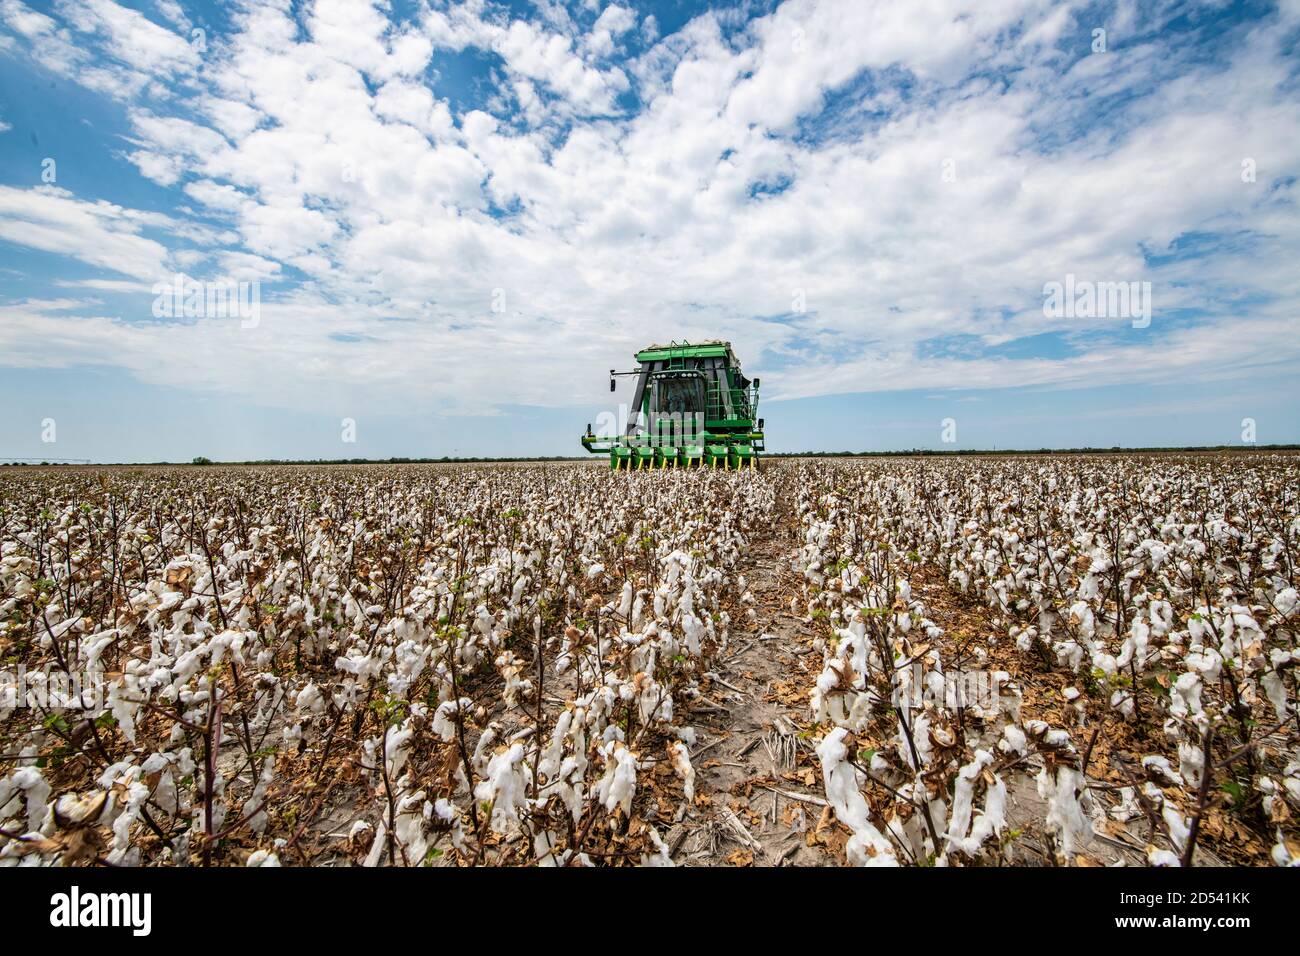 Operations Manager Brandon Schirmer operates a speciality cotton picking harvester at his family farm during the cotton harvest August 22, 2020 in Batesville, Texas. Stock Photo